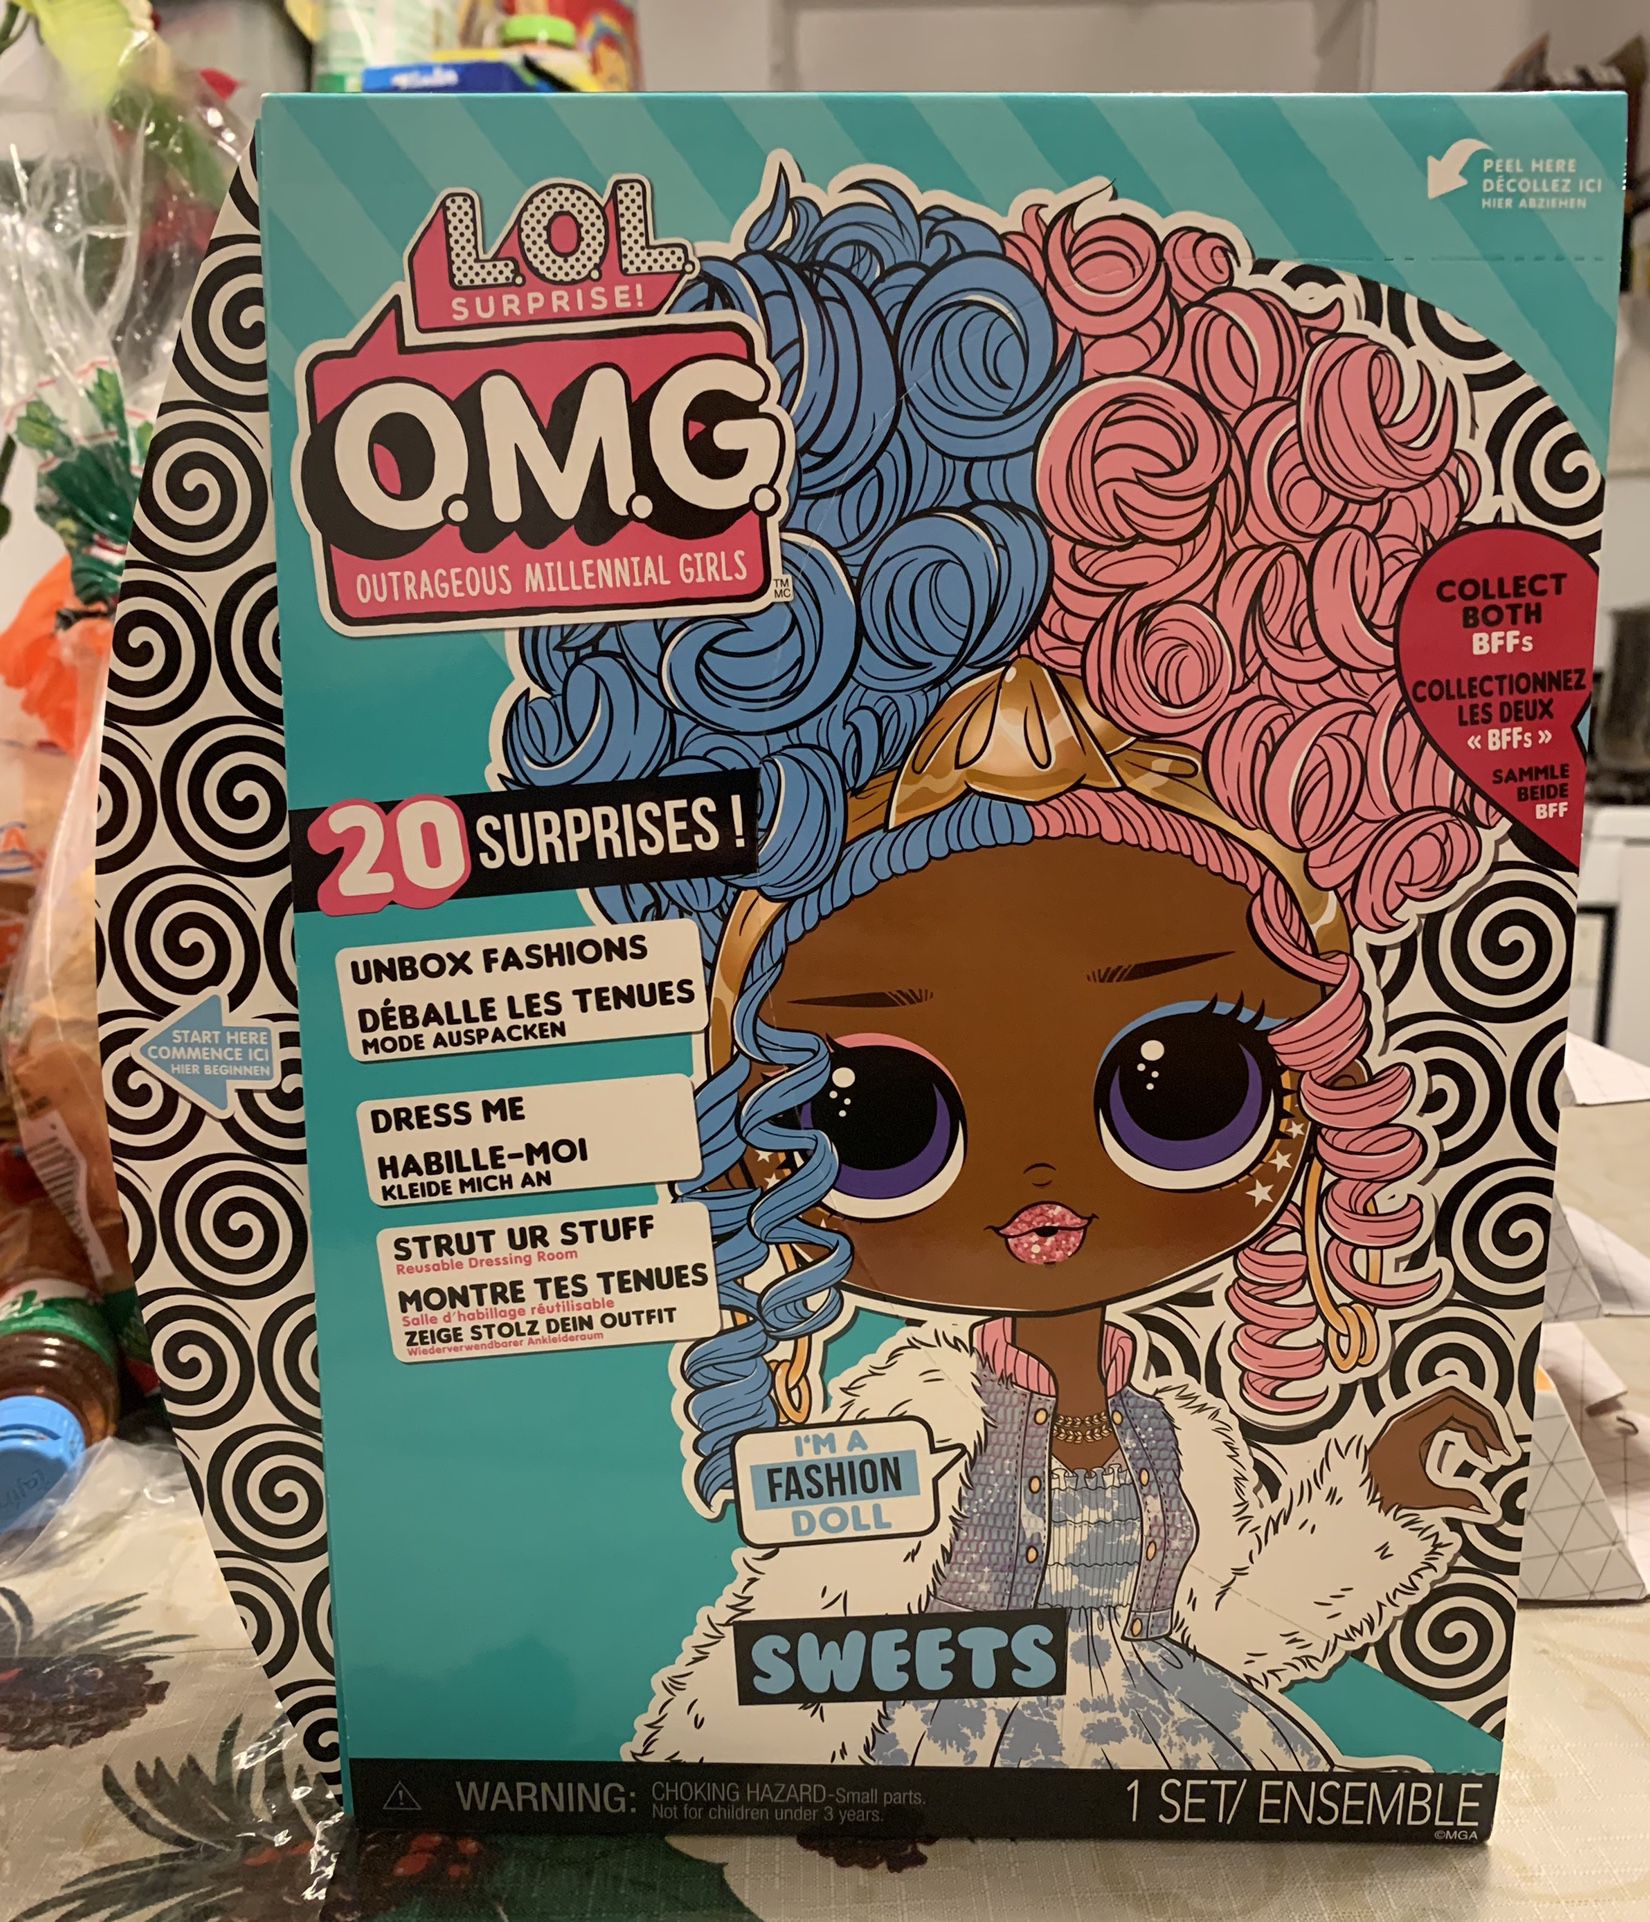 LOL Surprise! OMG Doll “ Sweets” 